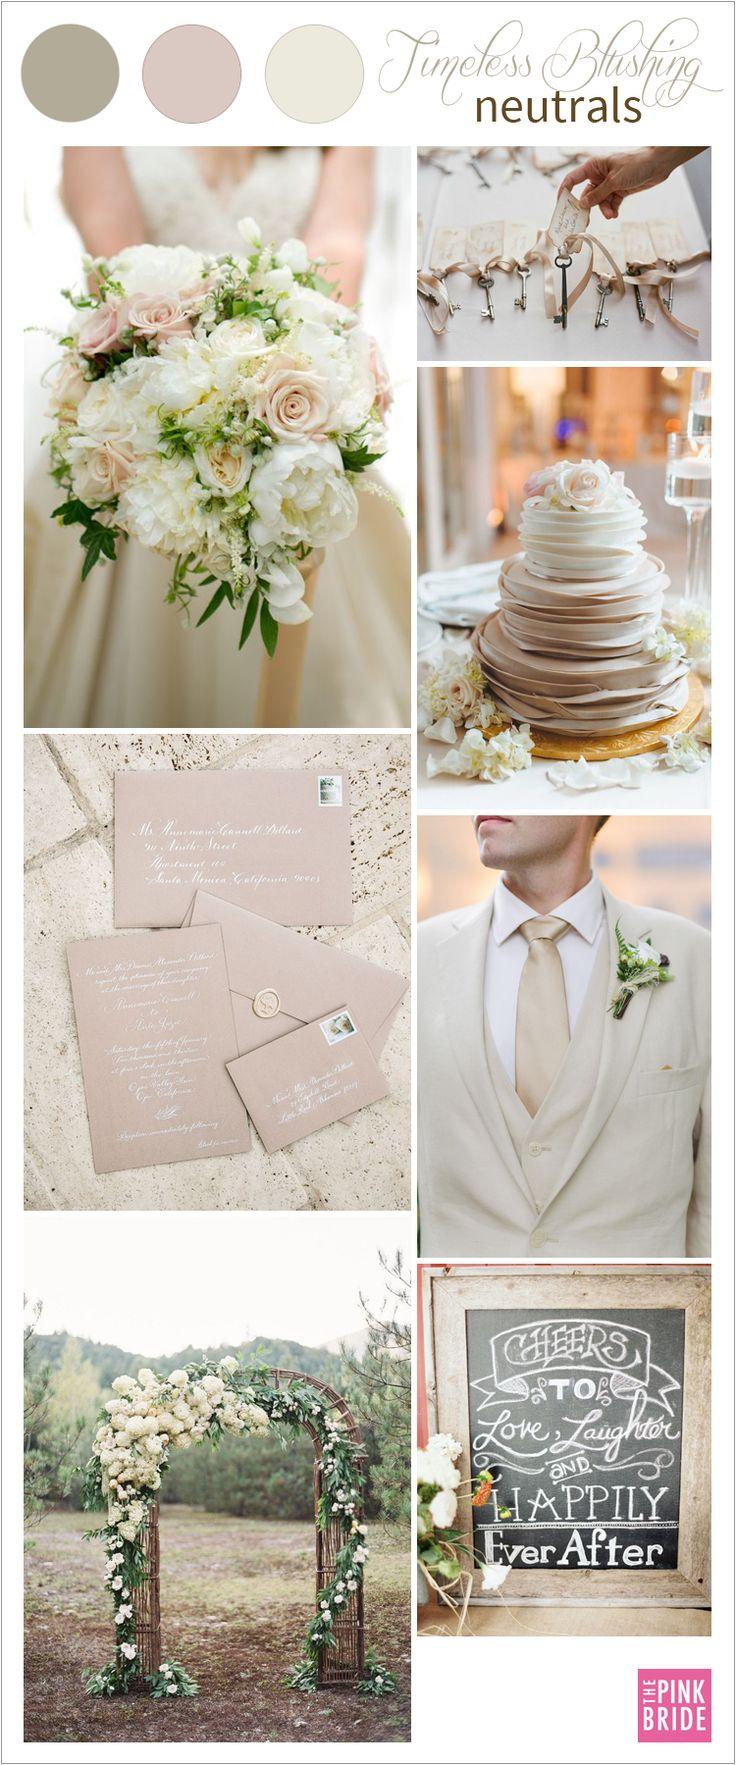 Mariage - Wedding Color Board: Timeless Blushing Neutrals